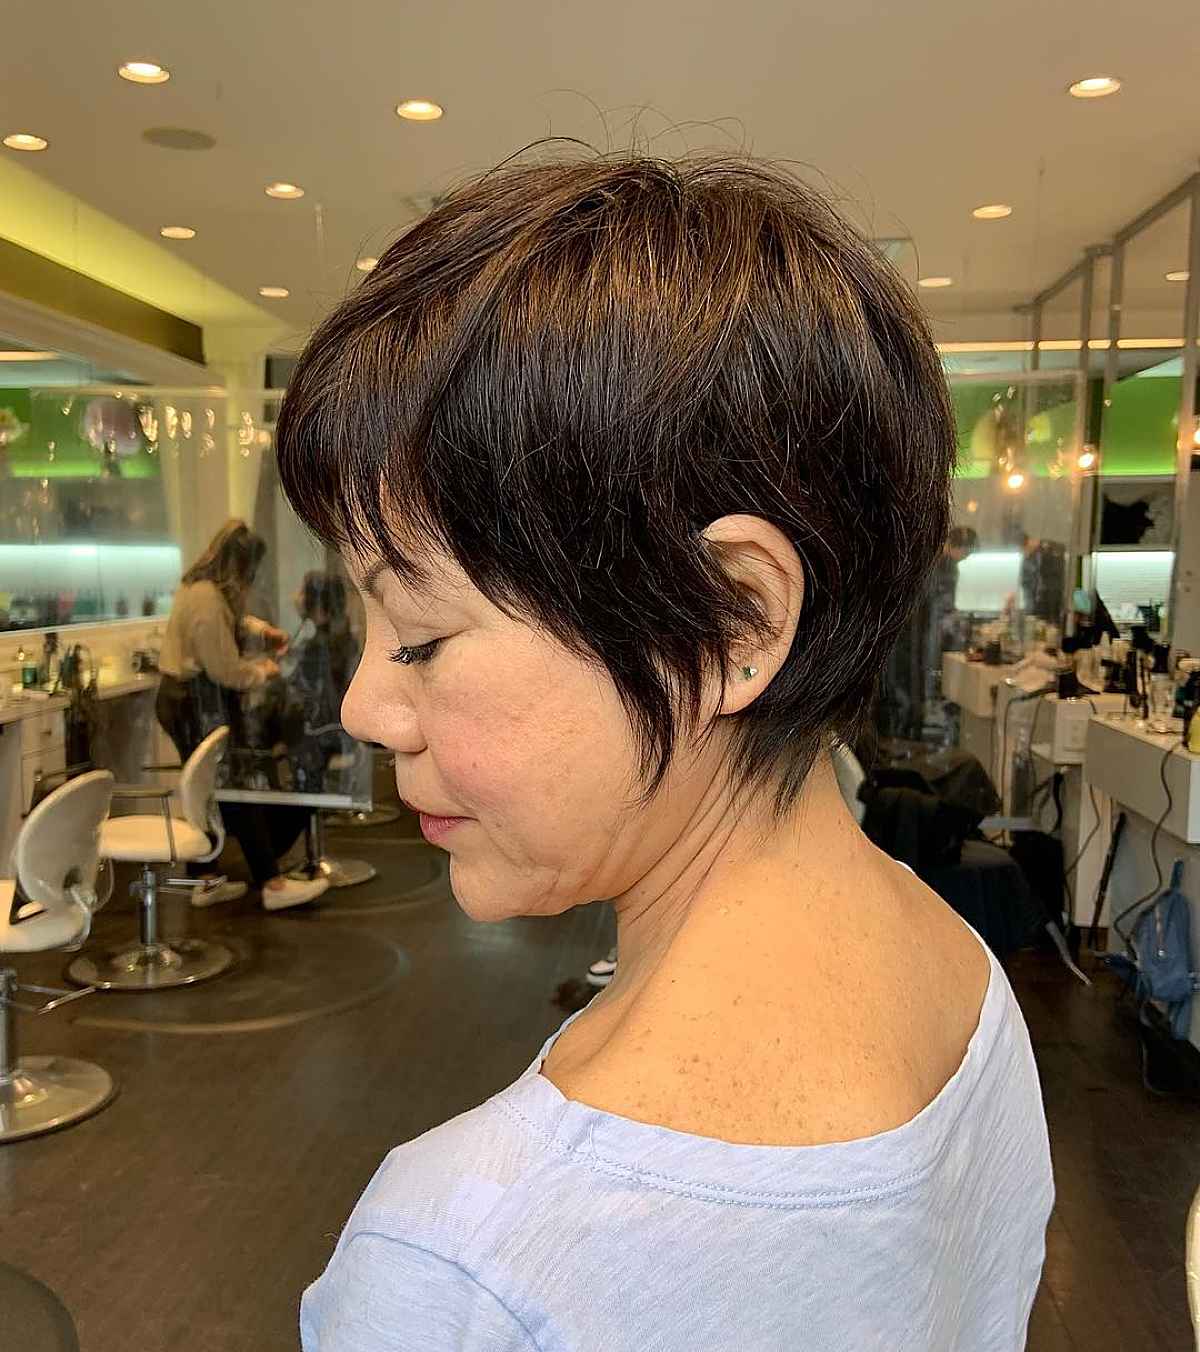 Long Pixie with Bangs for Women 50 and Up with Thin Hair